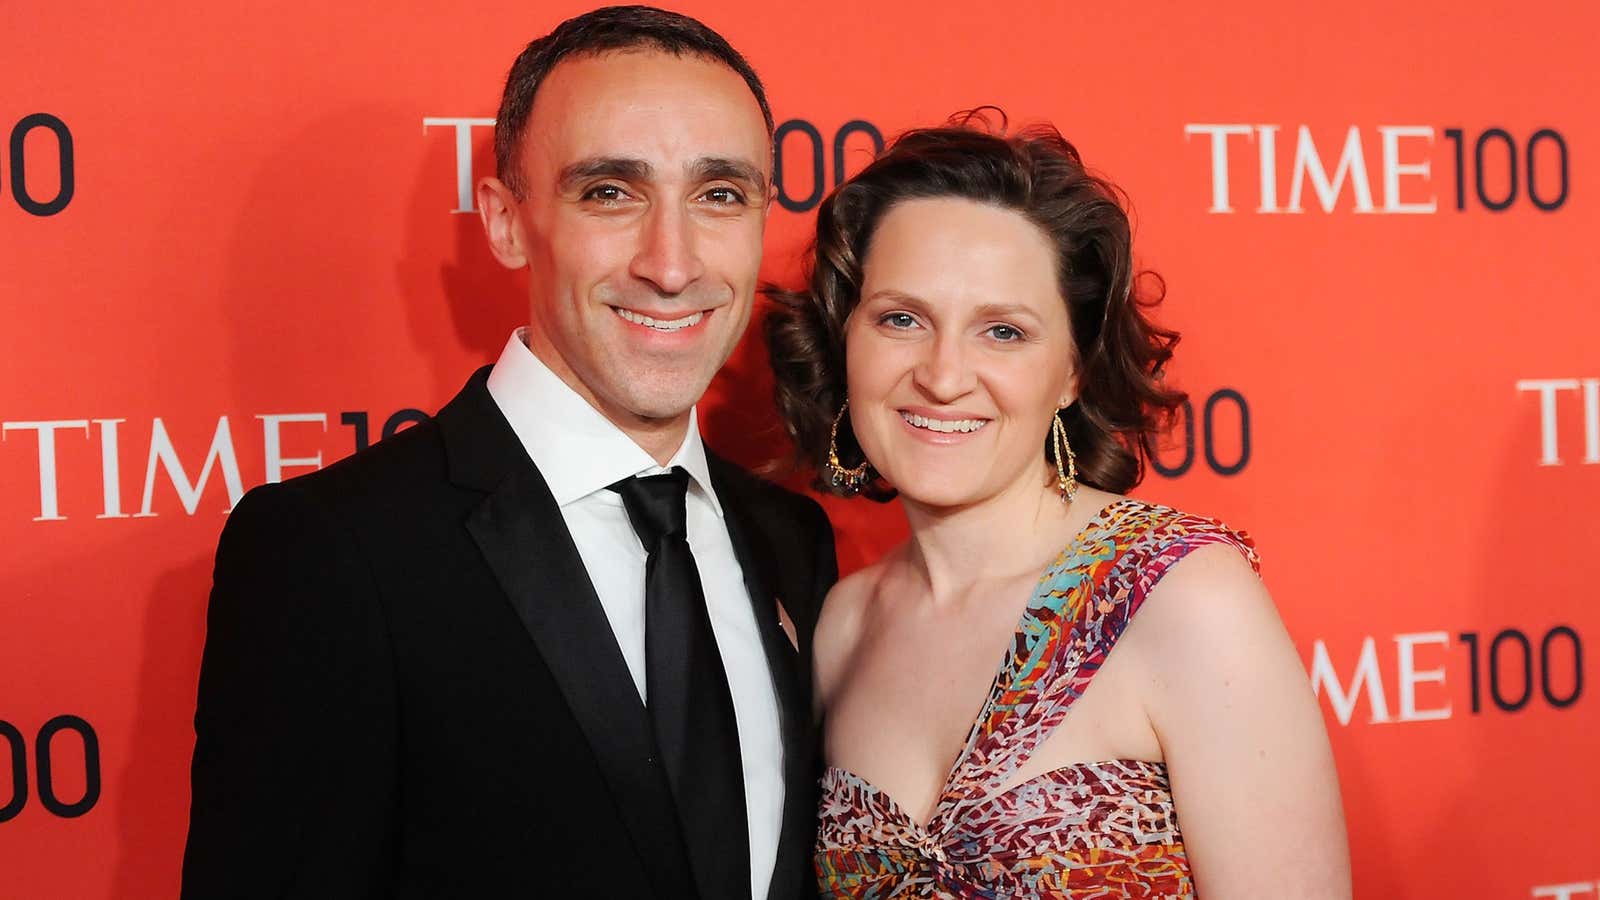 Sam Yagan and his match: his wife Jessica.